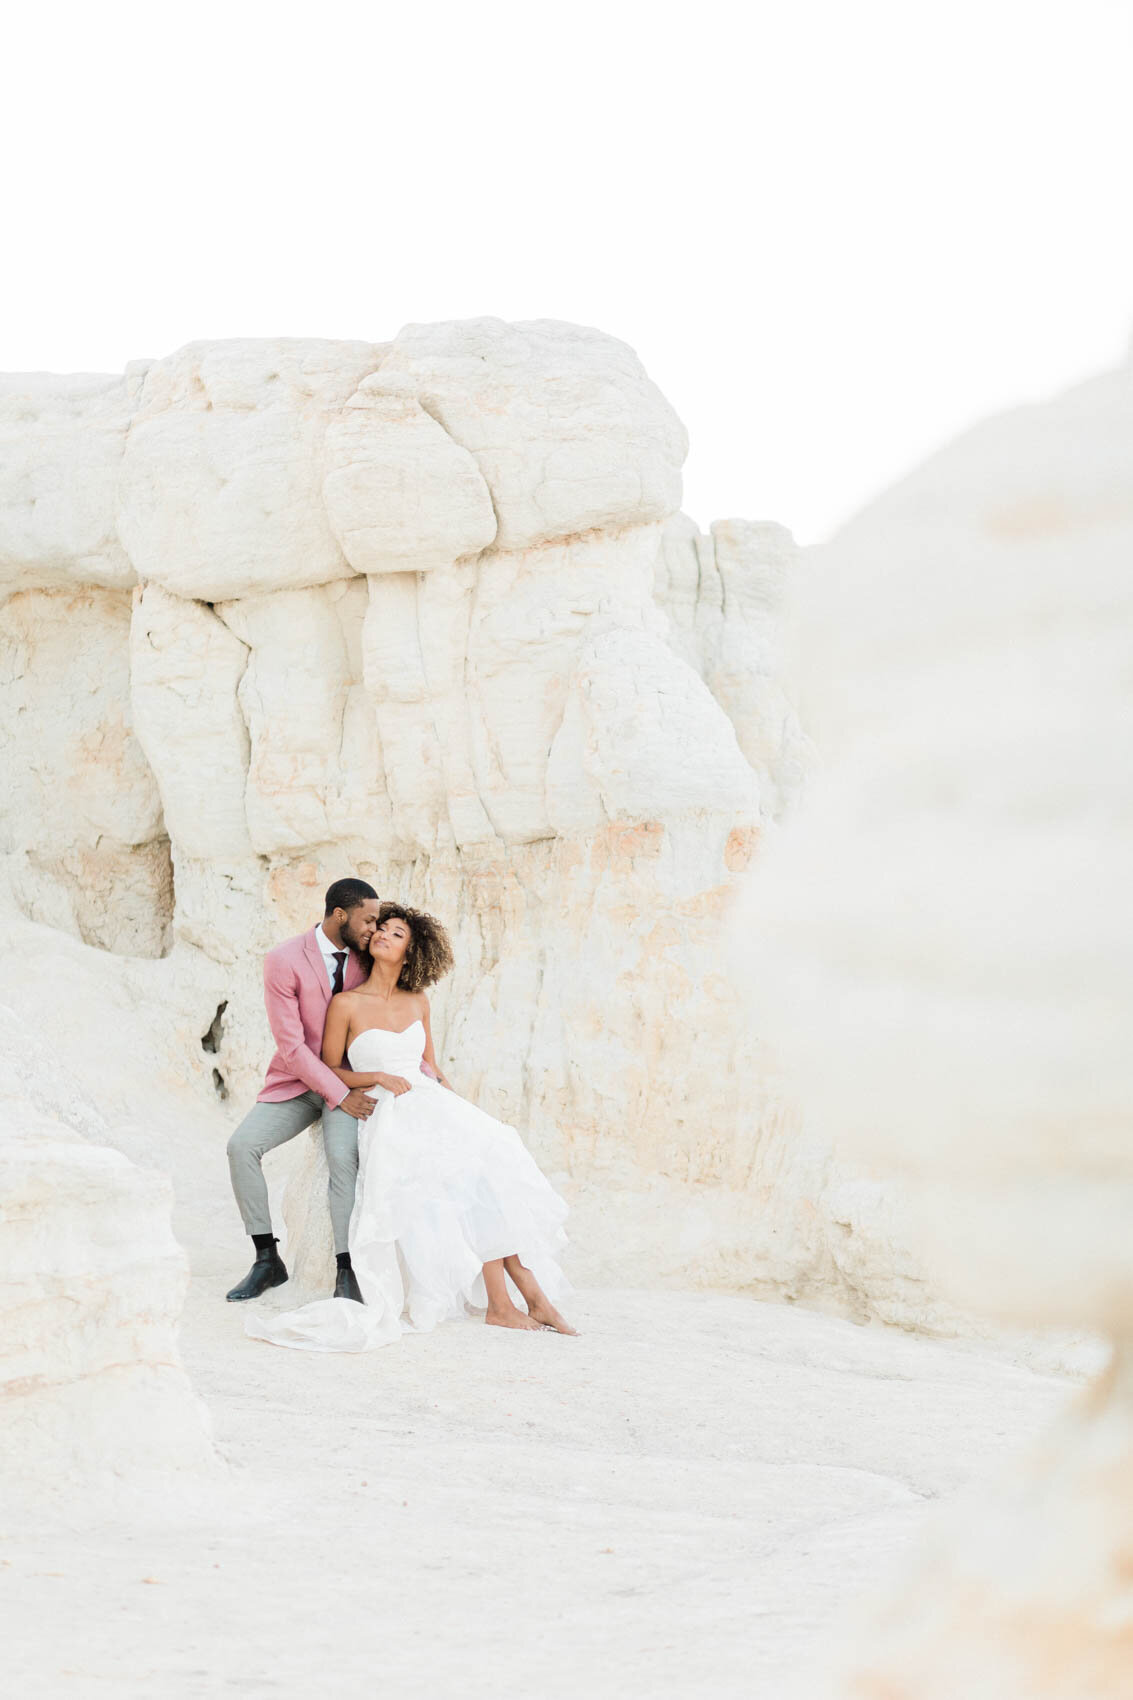 ethereal_editorial_at_the_Paint_mines_for_rocky_mountain_bride_by_colorado_wedding_photographer_diana_coulter-25